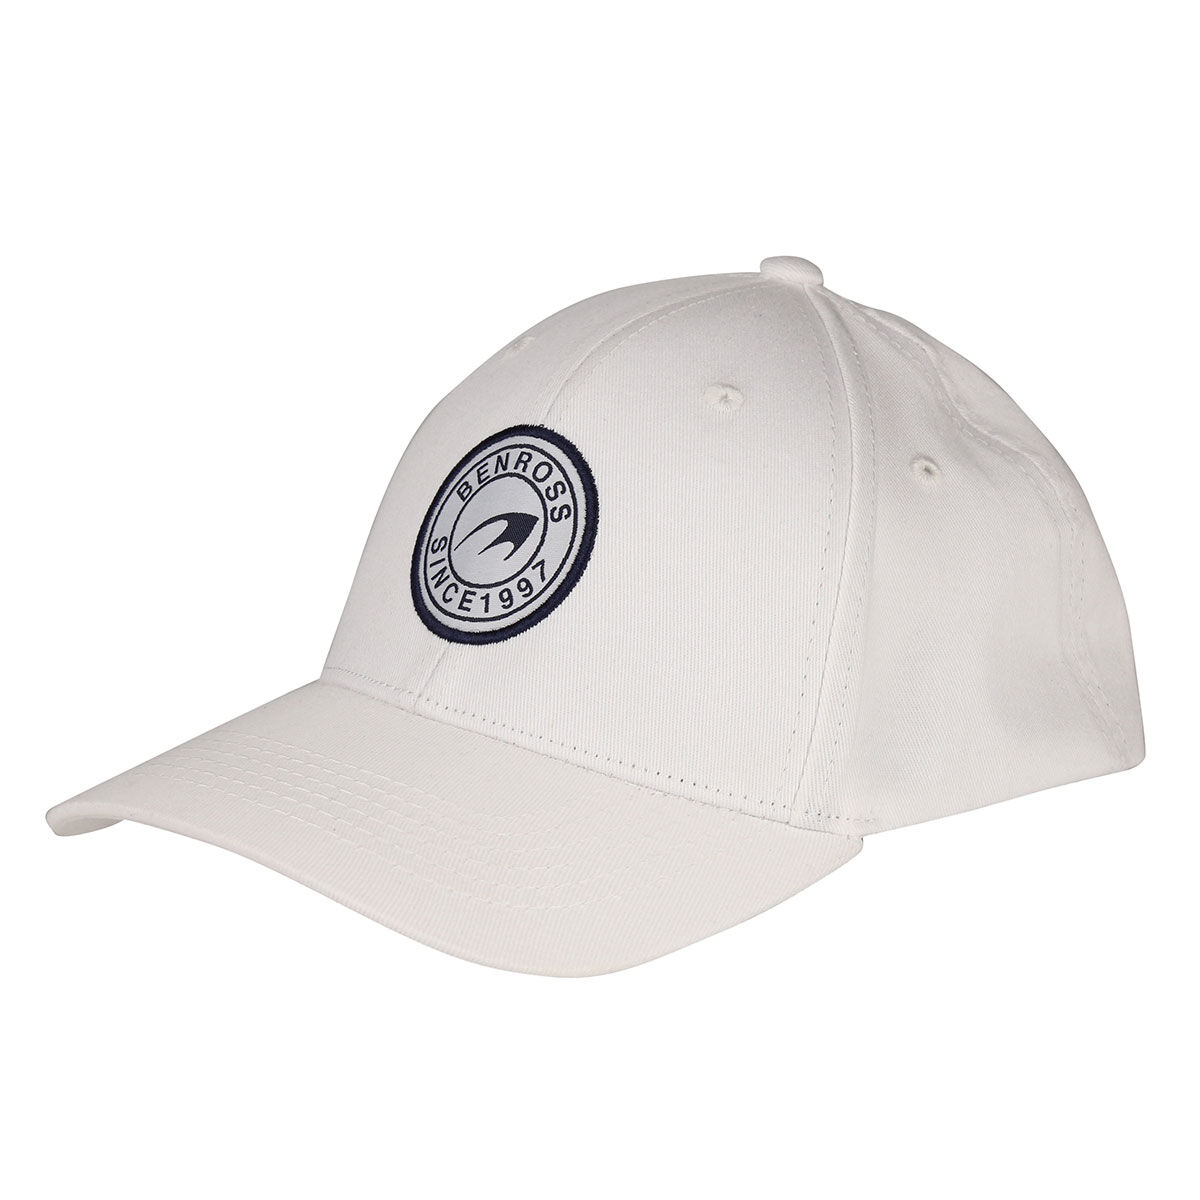 Benross Men's White and Navy Blue Embroidered Established Patch Golf Cap | American Golf, One Size von Benross